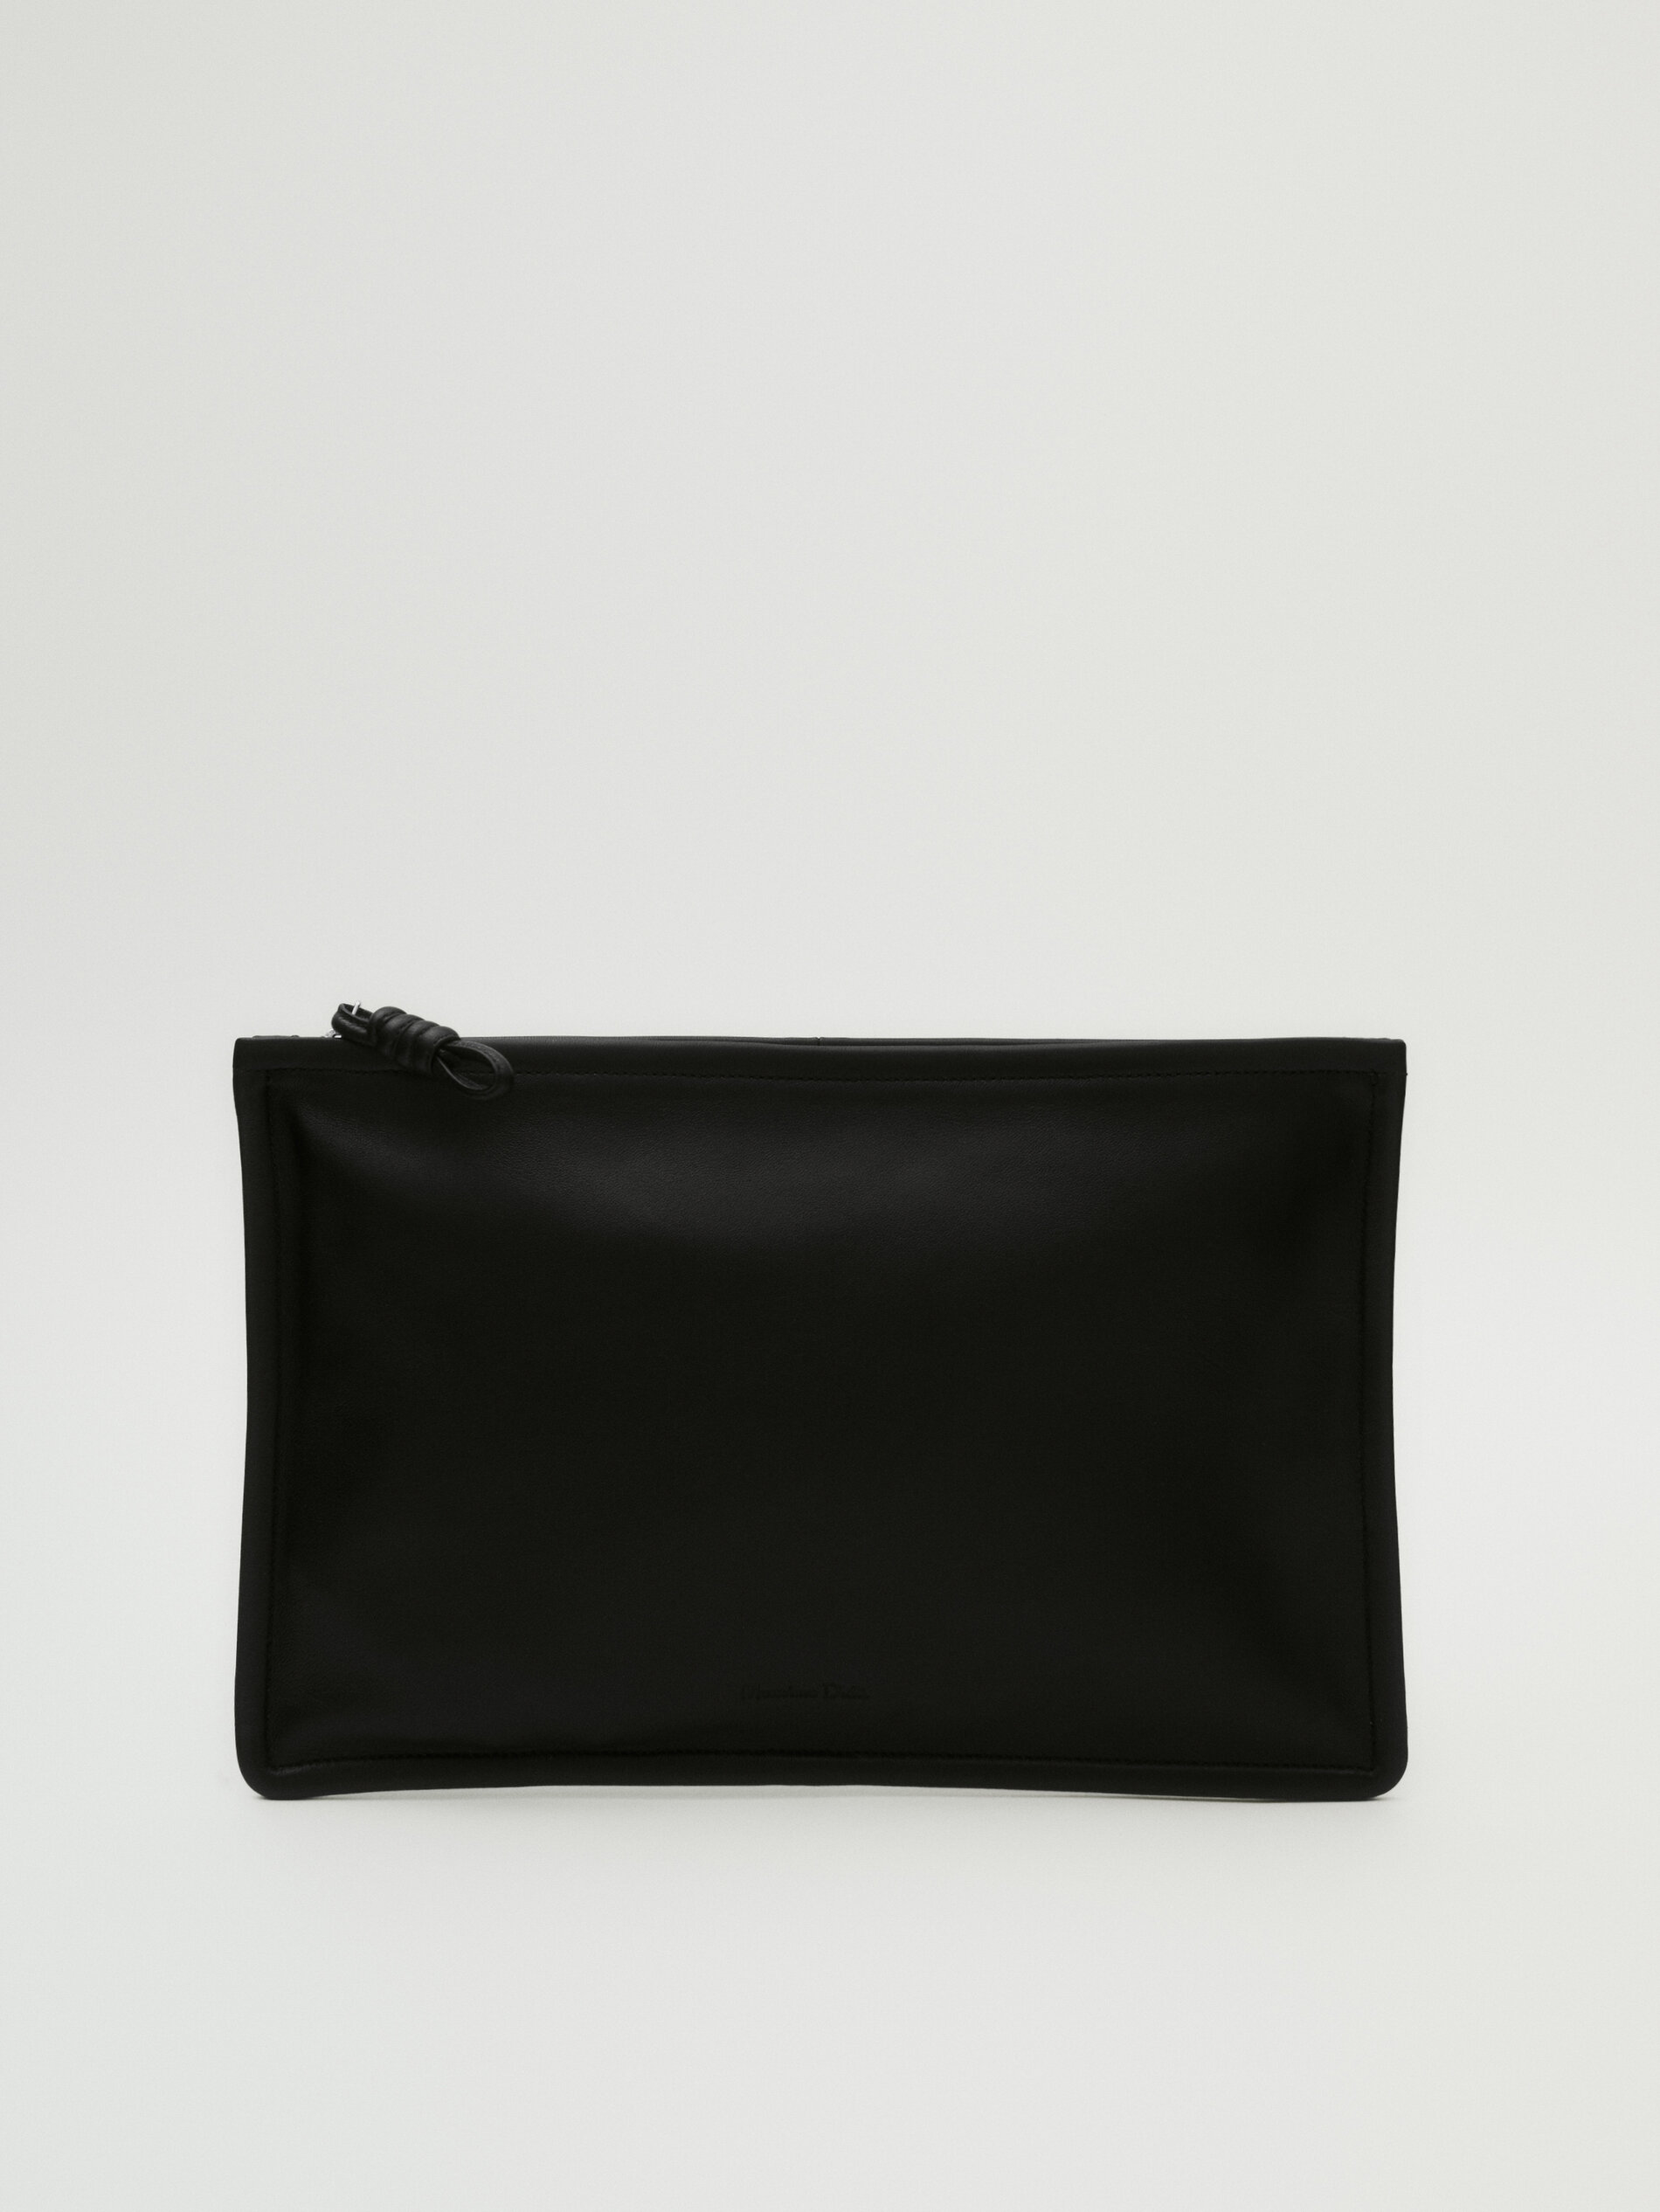 Massimo Dutti + Nappa Leather-based mostly Clutch with Knot Detail